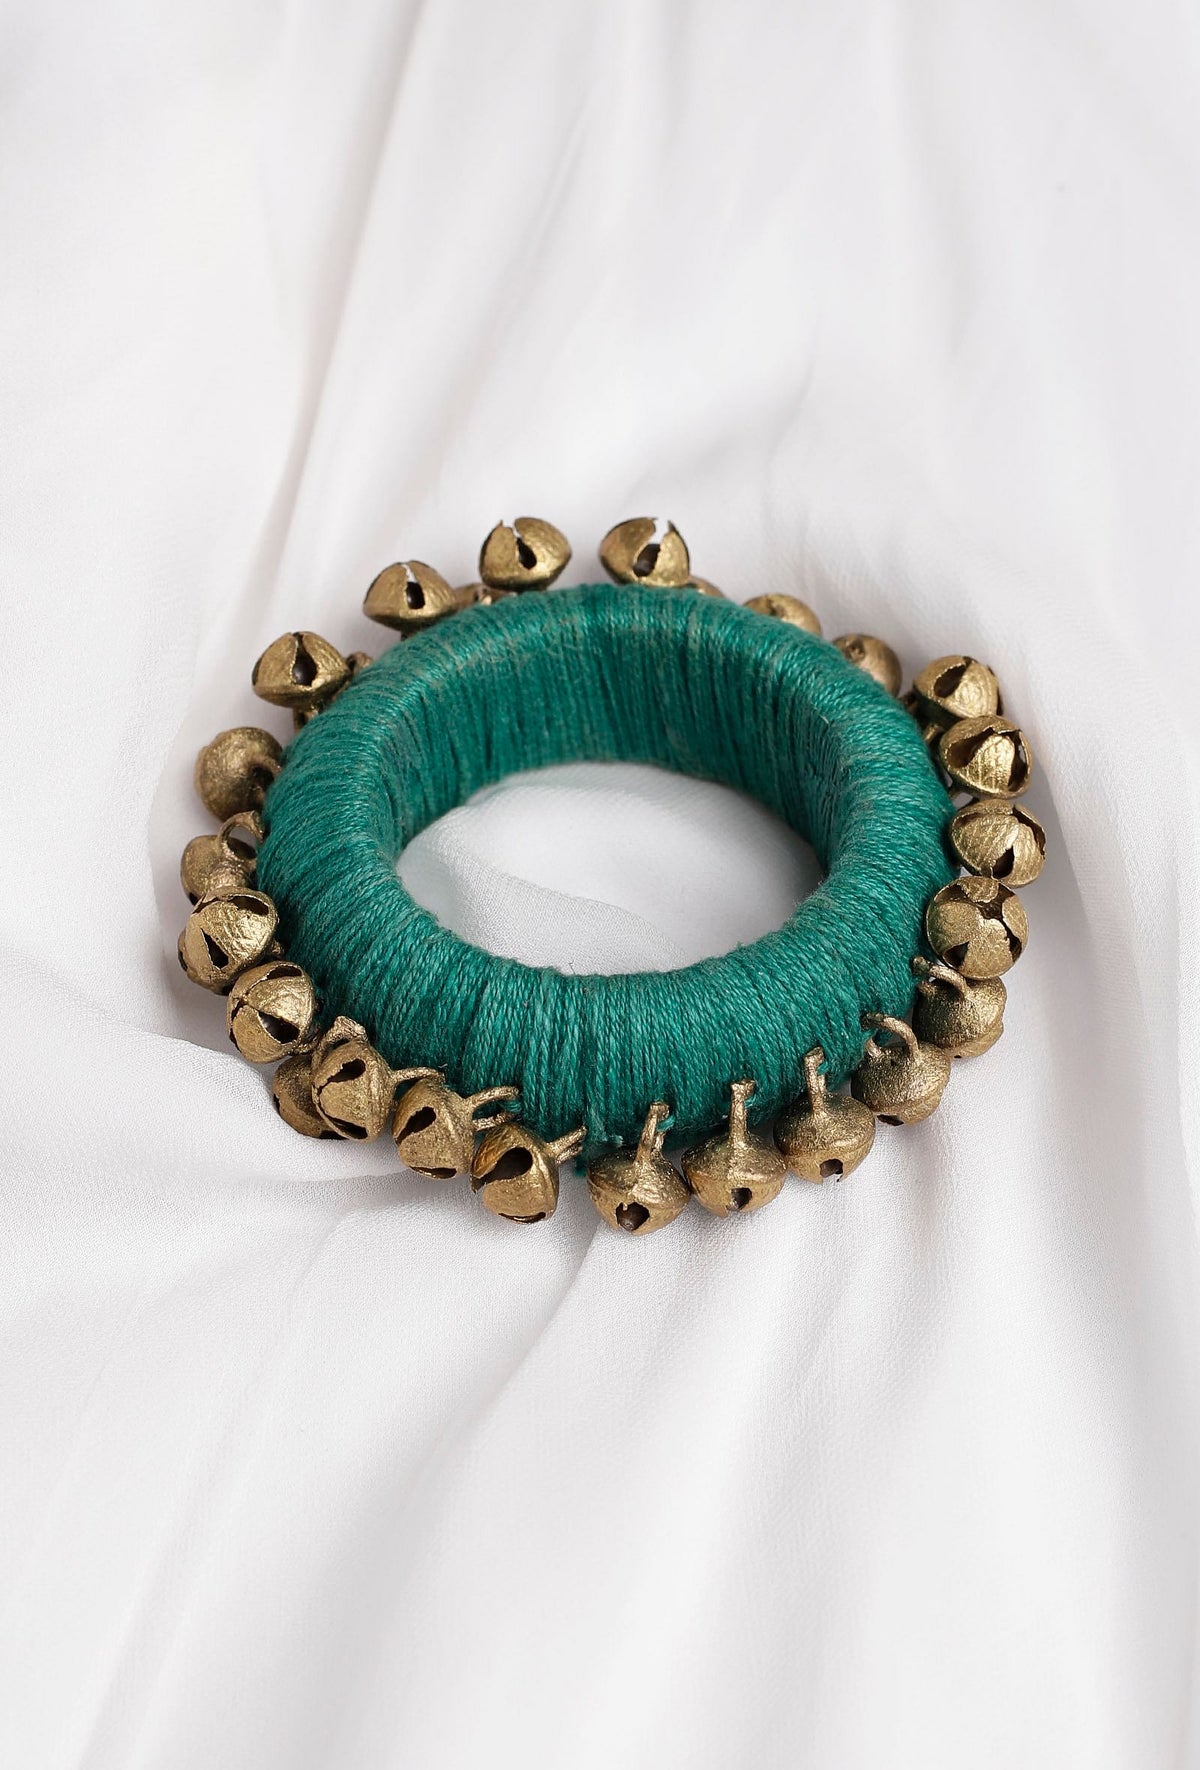 Teal Thread Wooden Bangles